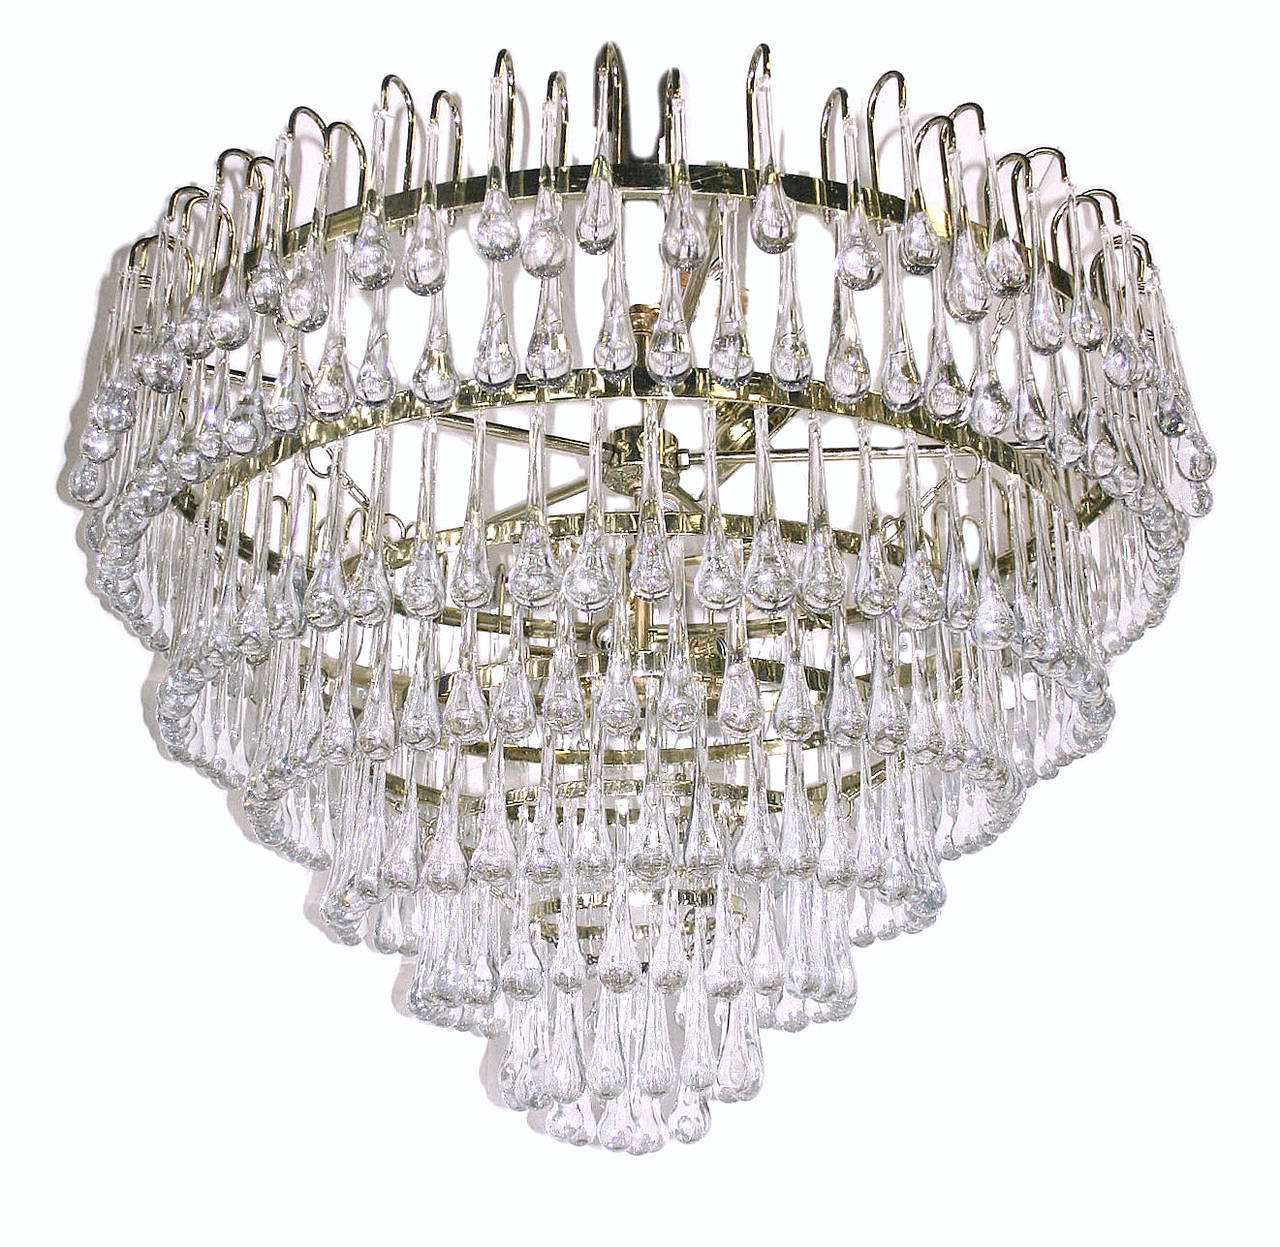 A circa 1960s Italian glass drop chandelier with seven concentric layers of gilt metal with blown glass pendants.
12 lights.